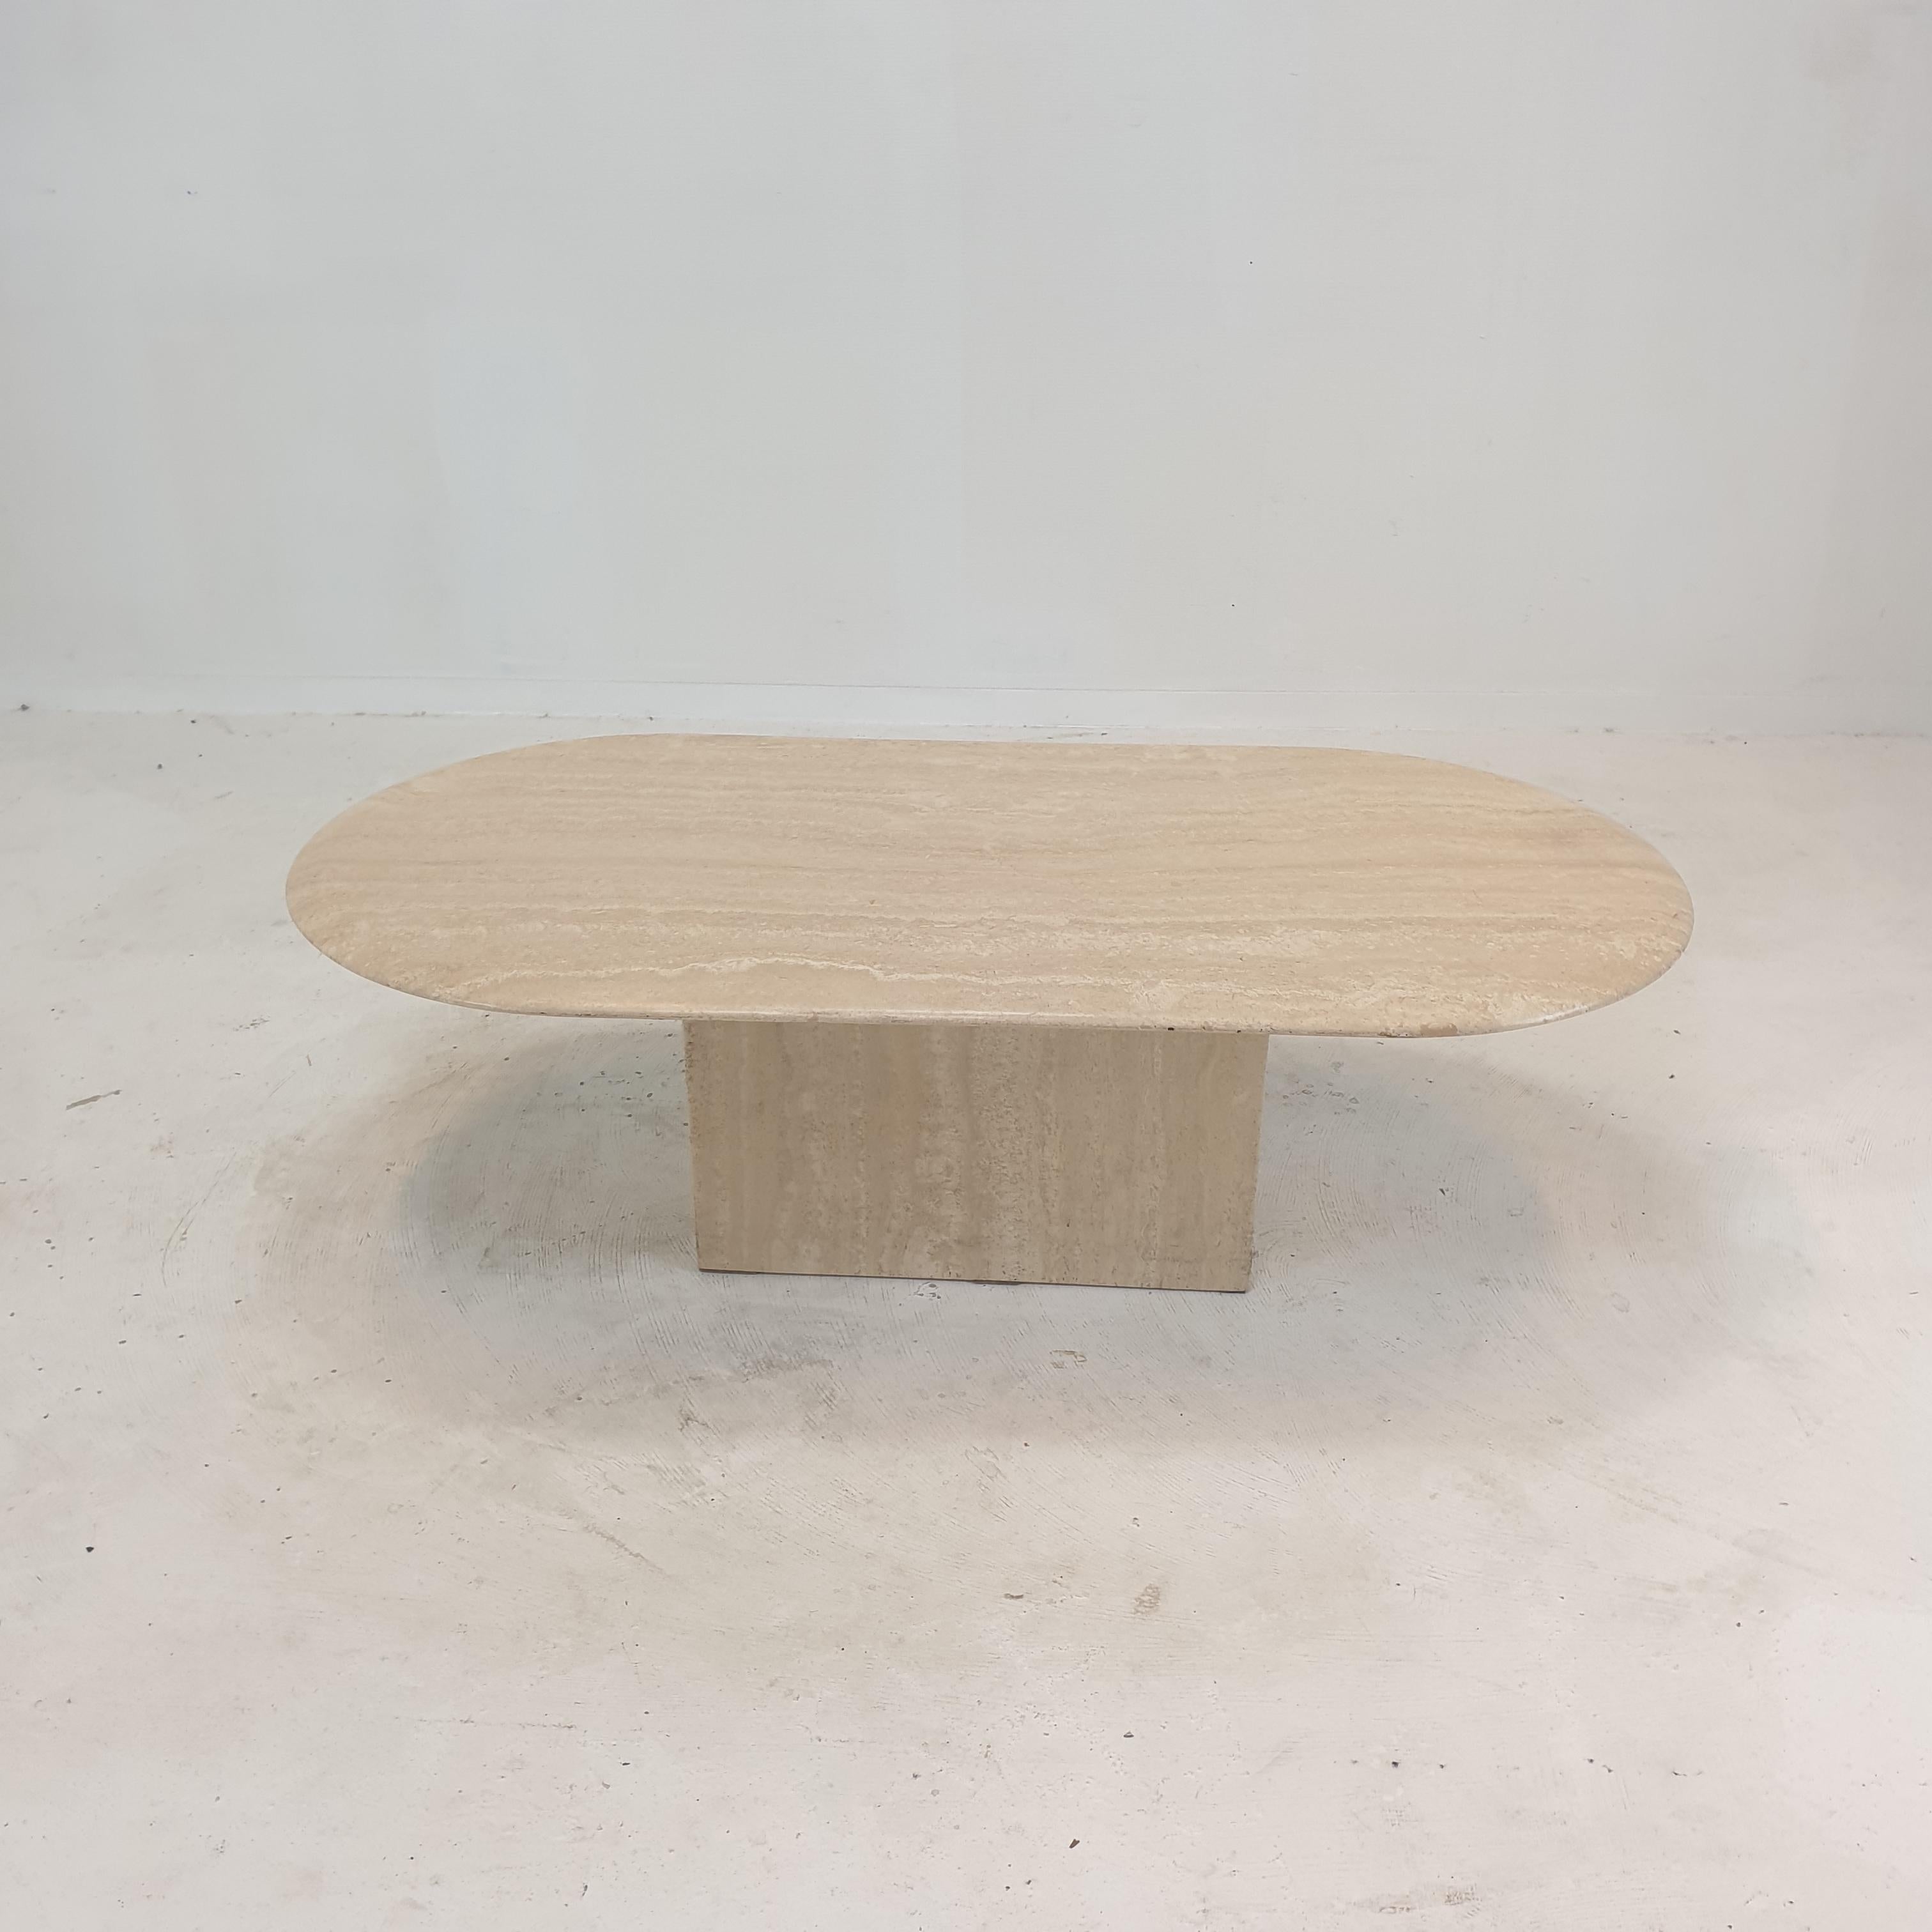 Hand-Crafted Italian Oval Coffee Table in Travertine, 1980s